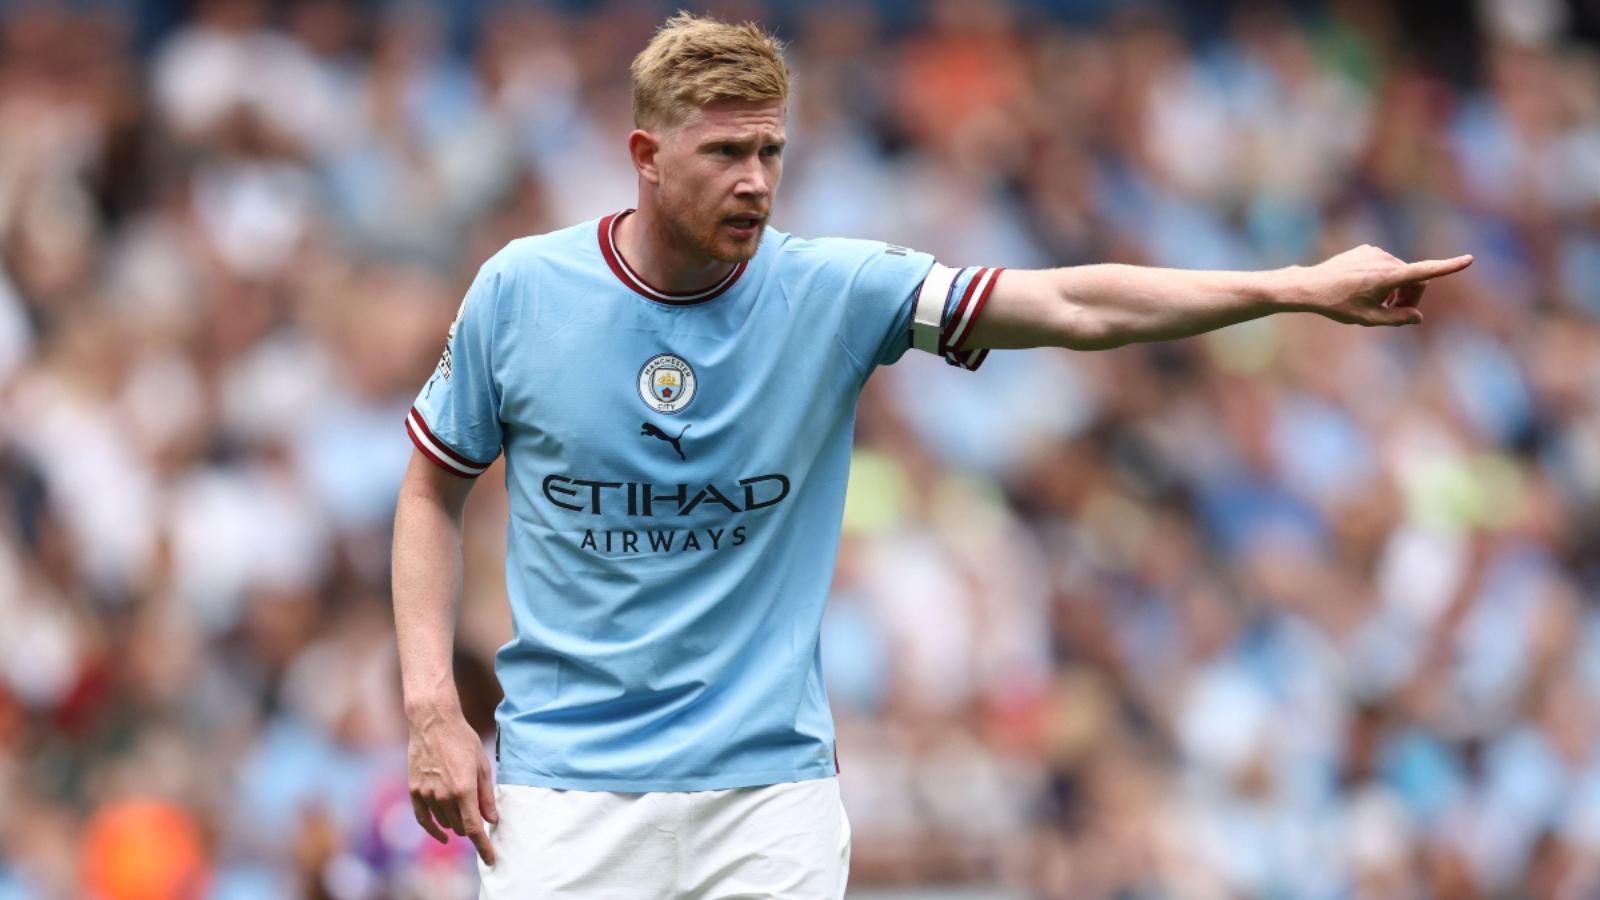 Kevin de Bruyne points during the Premier League game between Manchester City and Crystal Palace at Etihad Stadium, Manchester, August 2022.